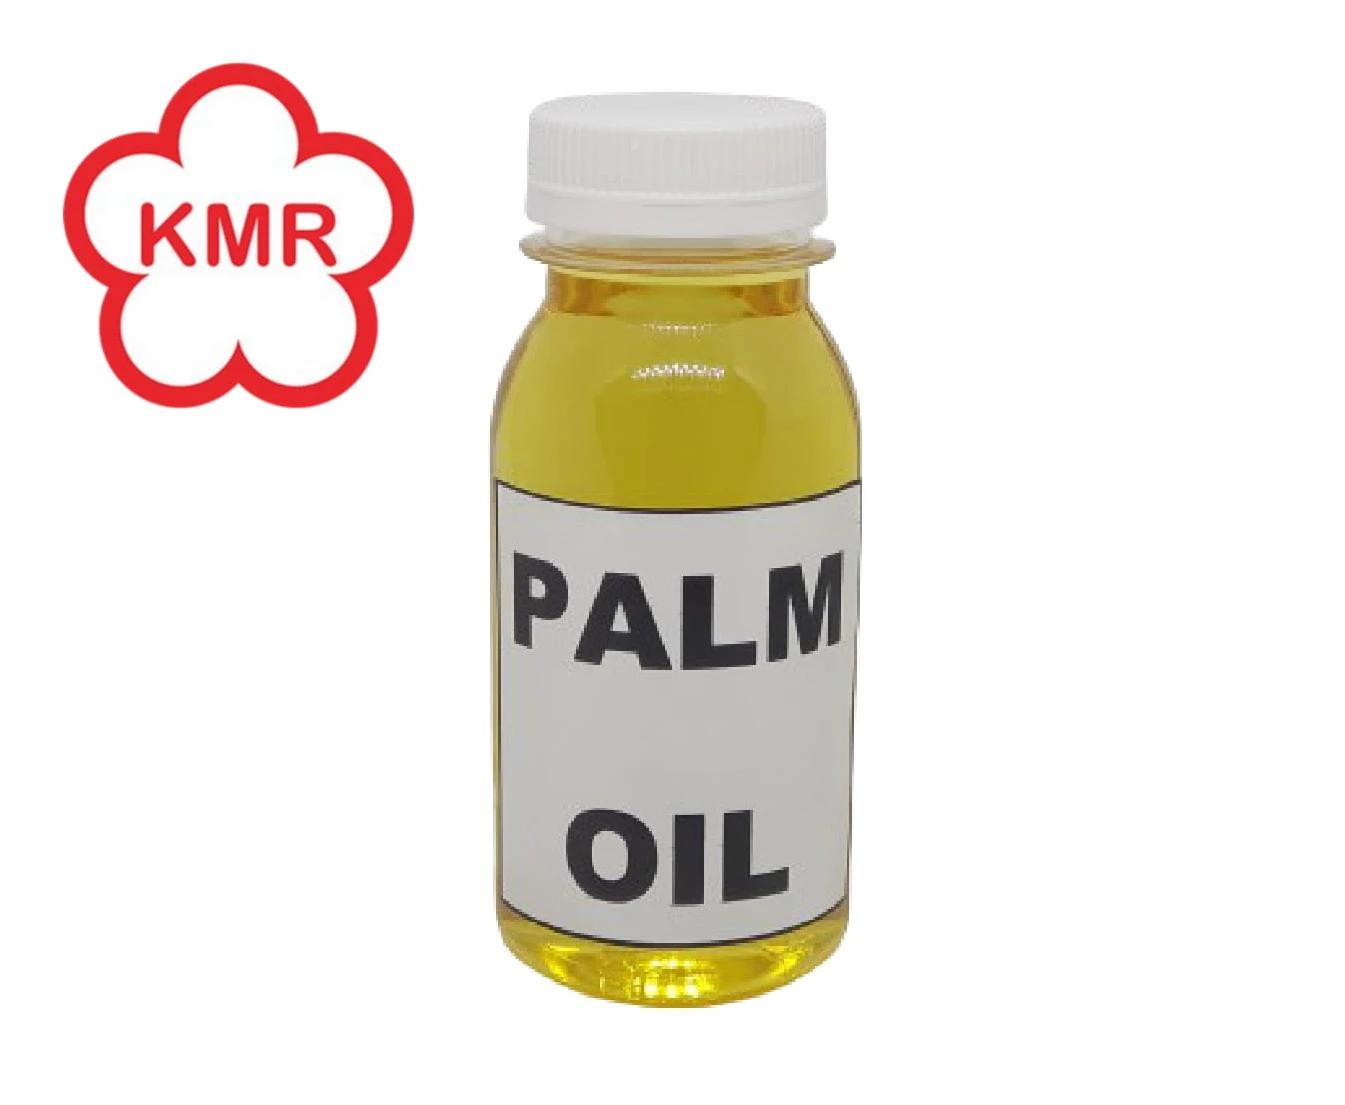 BEST PRODUCT OF PALM OIL